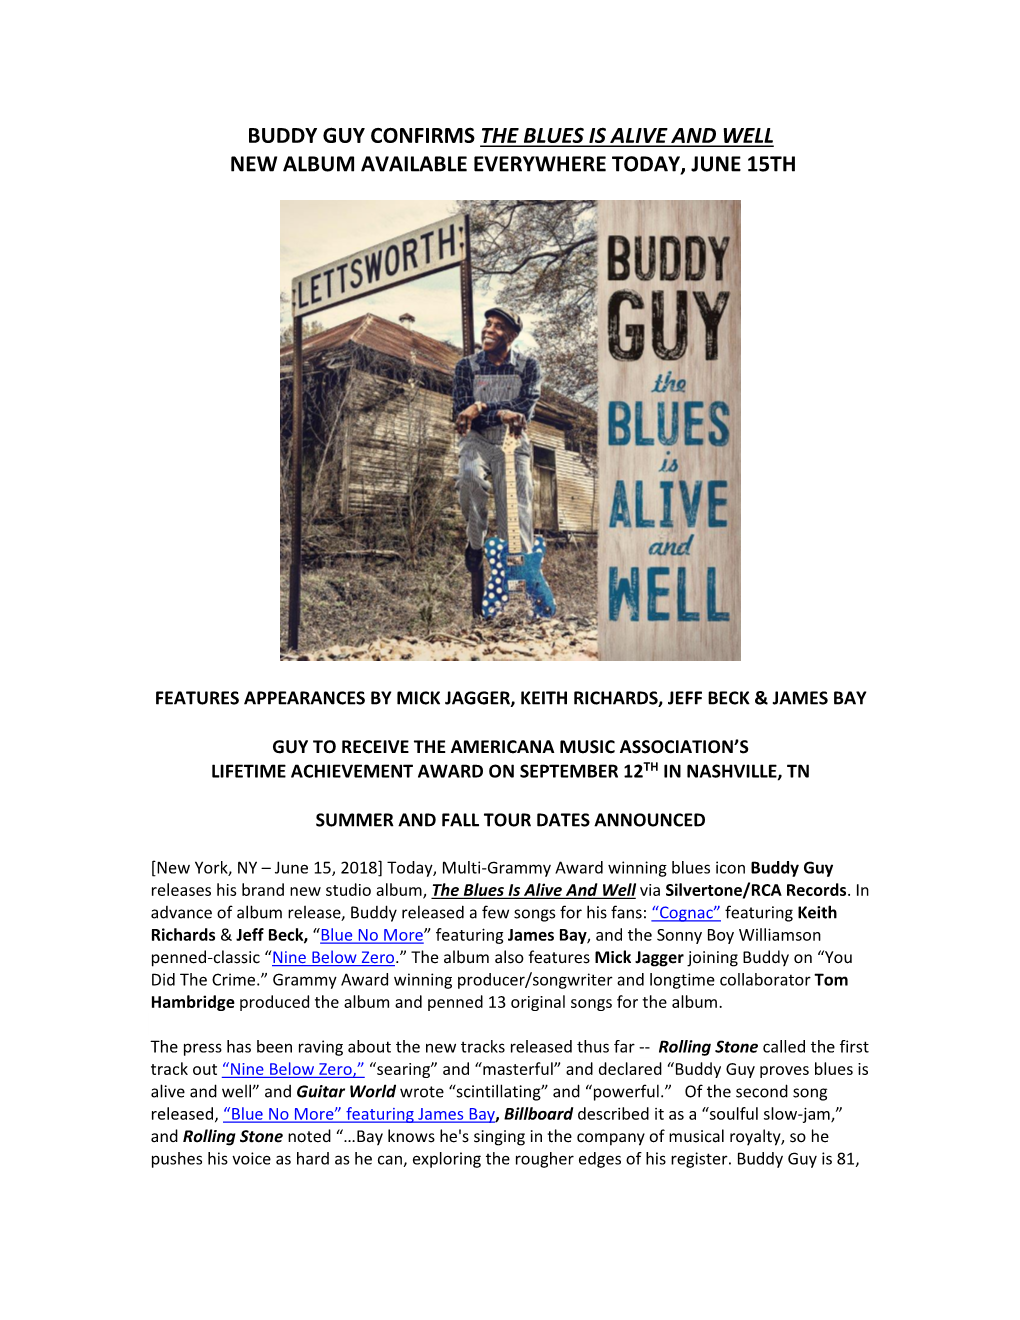 Buddy Guy Confirms the Blues Is Alive and Well New Album Available Everywhere Today, June 15Th